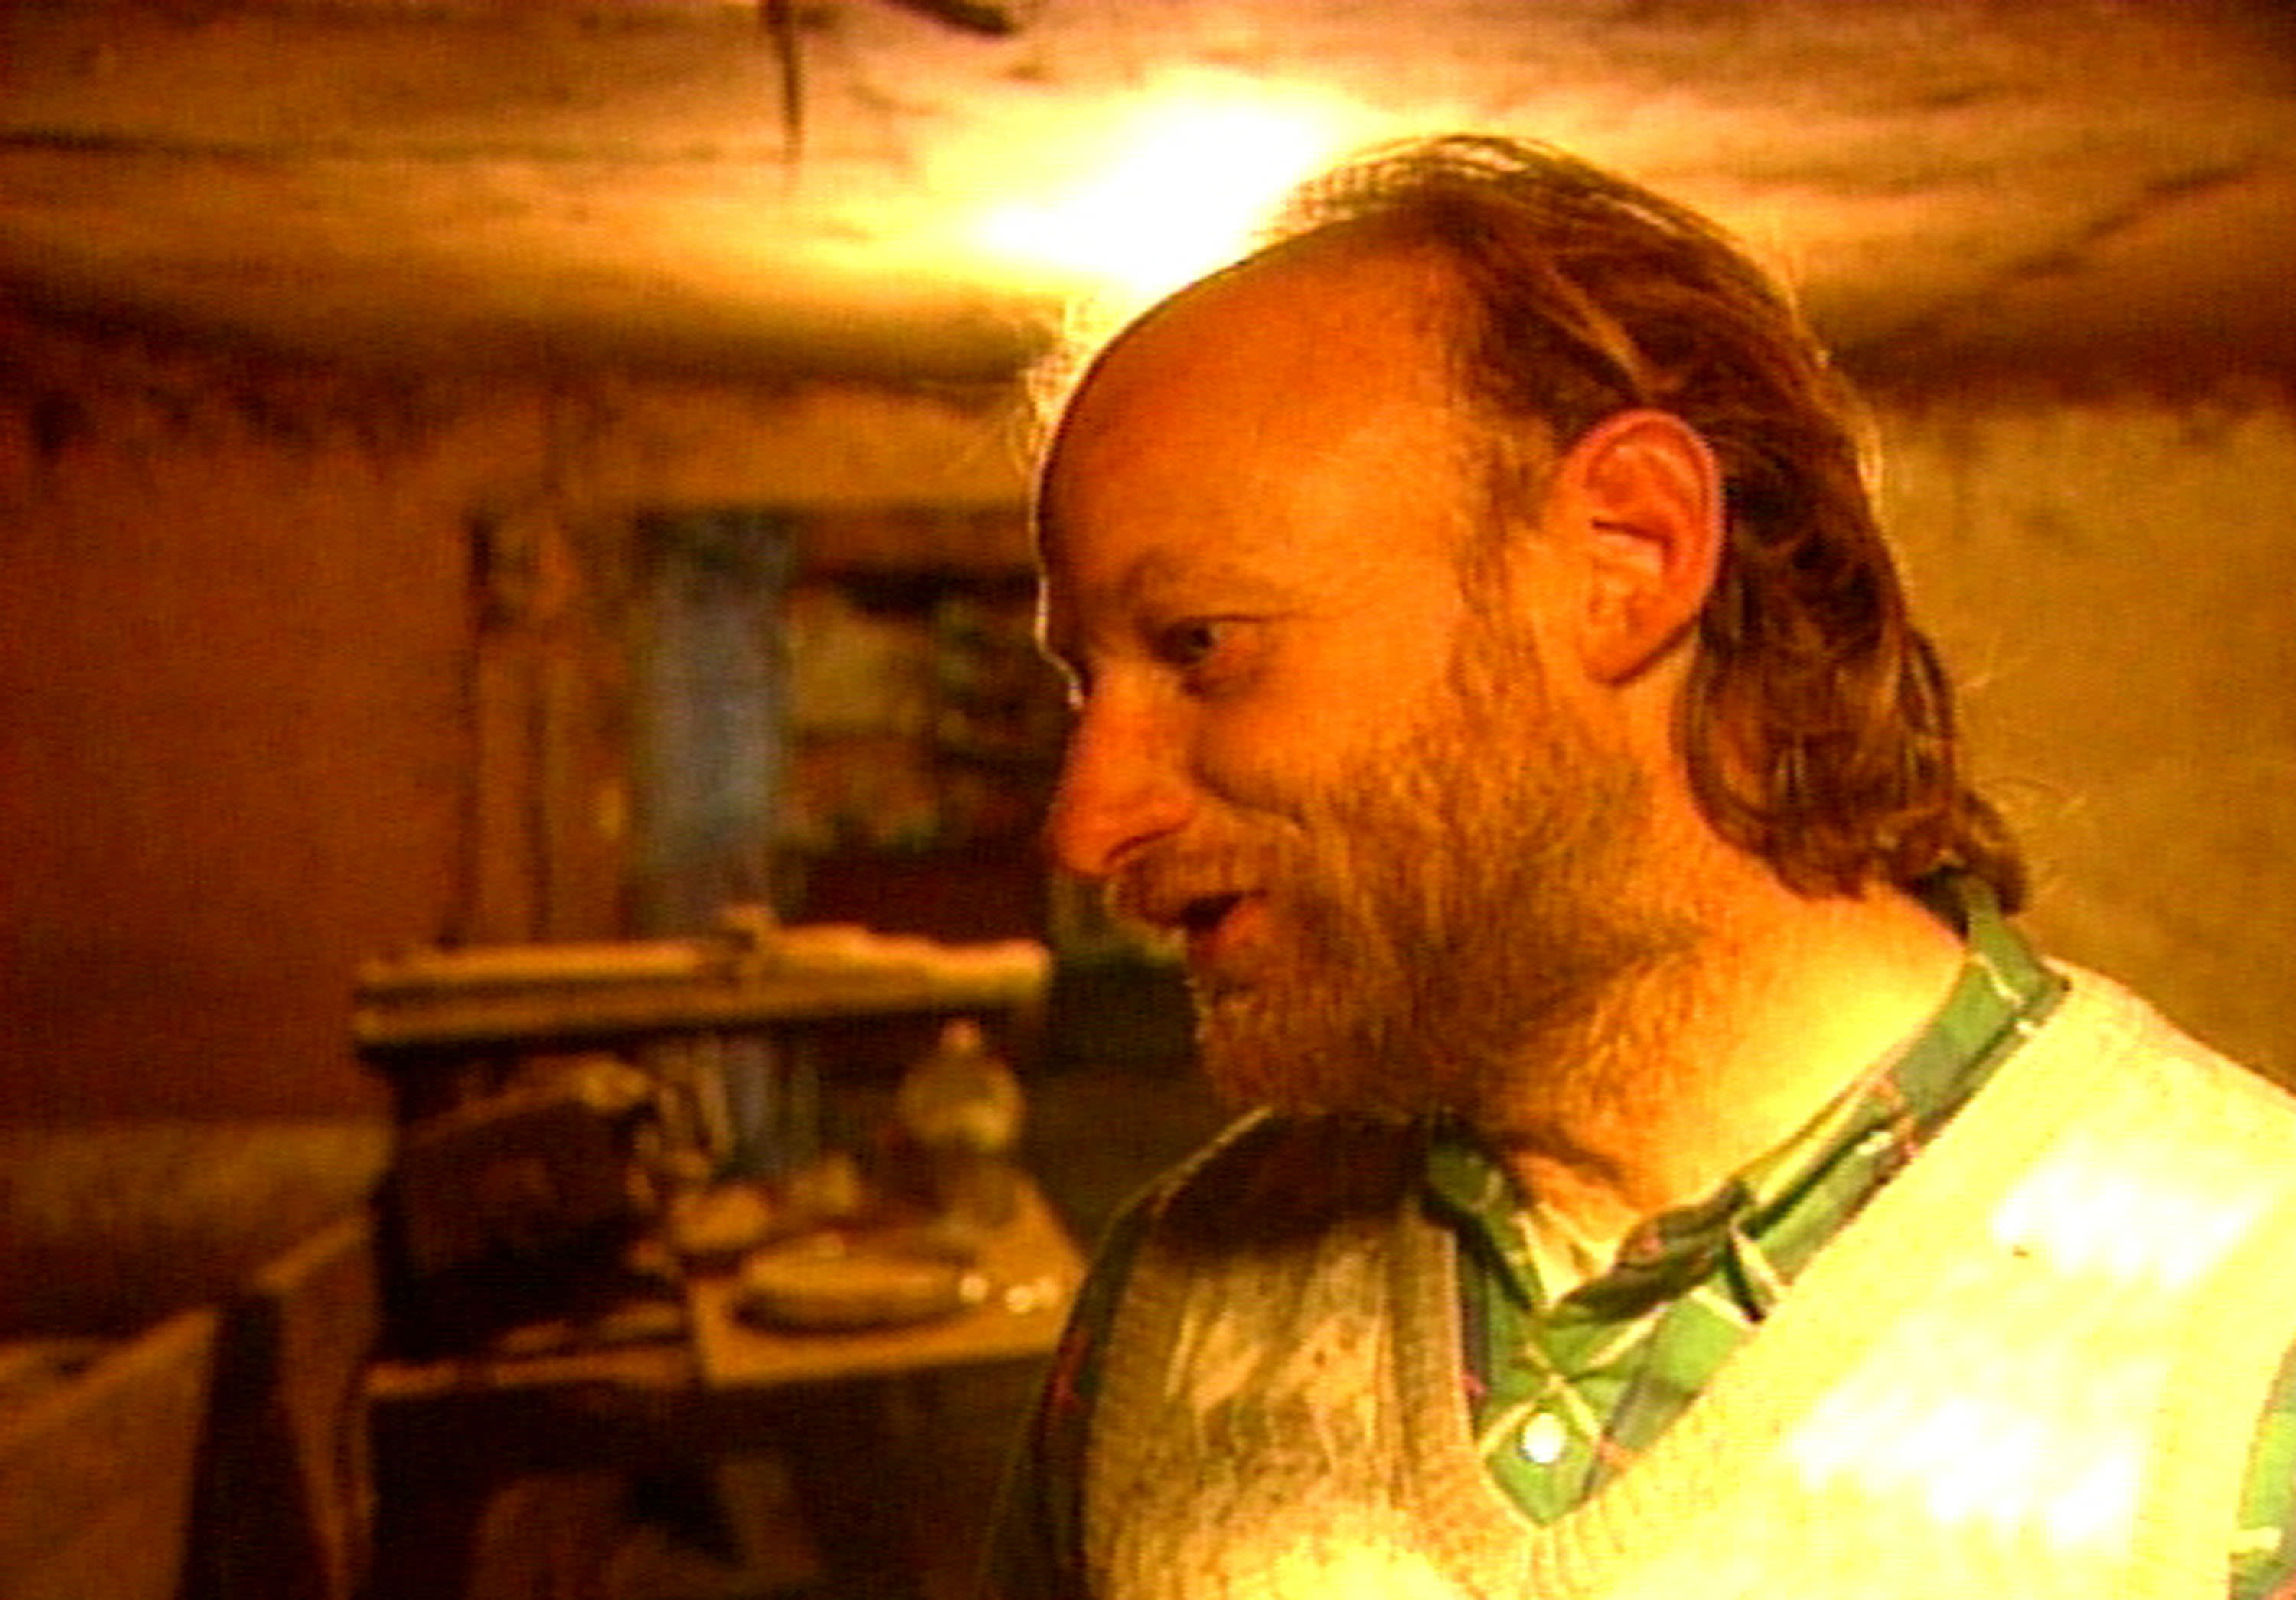 Serial Killer Robert Pickton clings to life after 'major attack' in prison